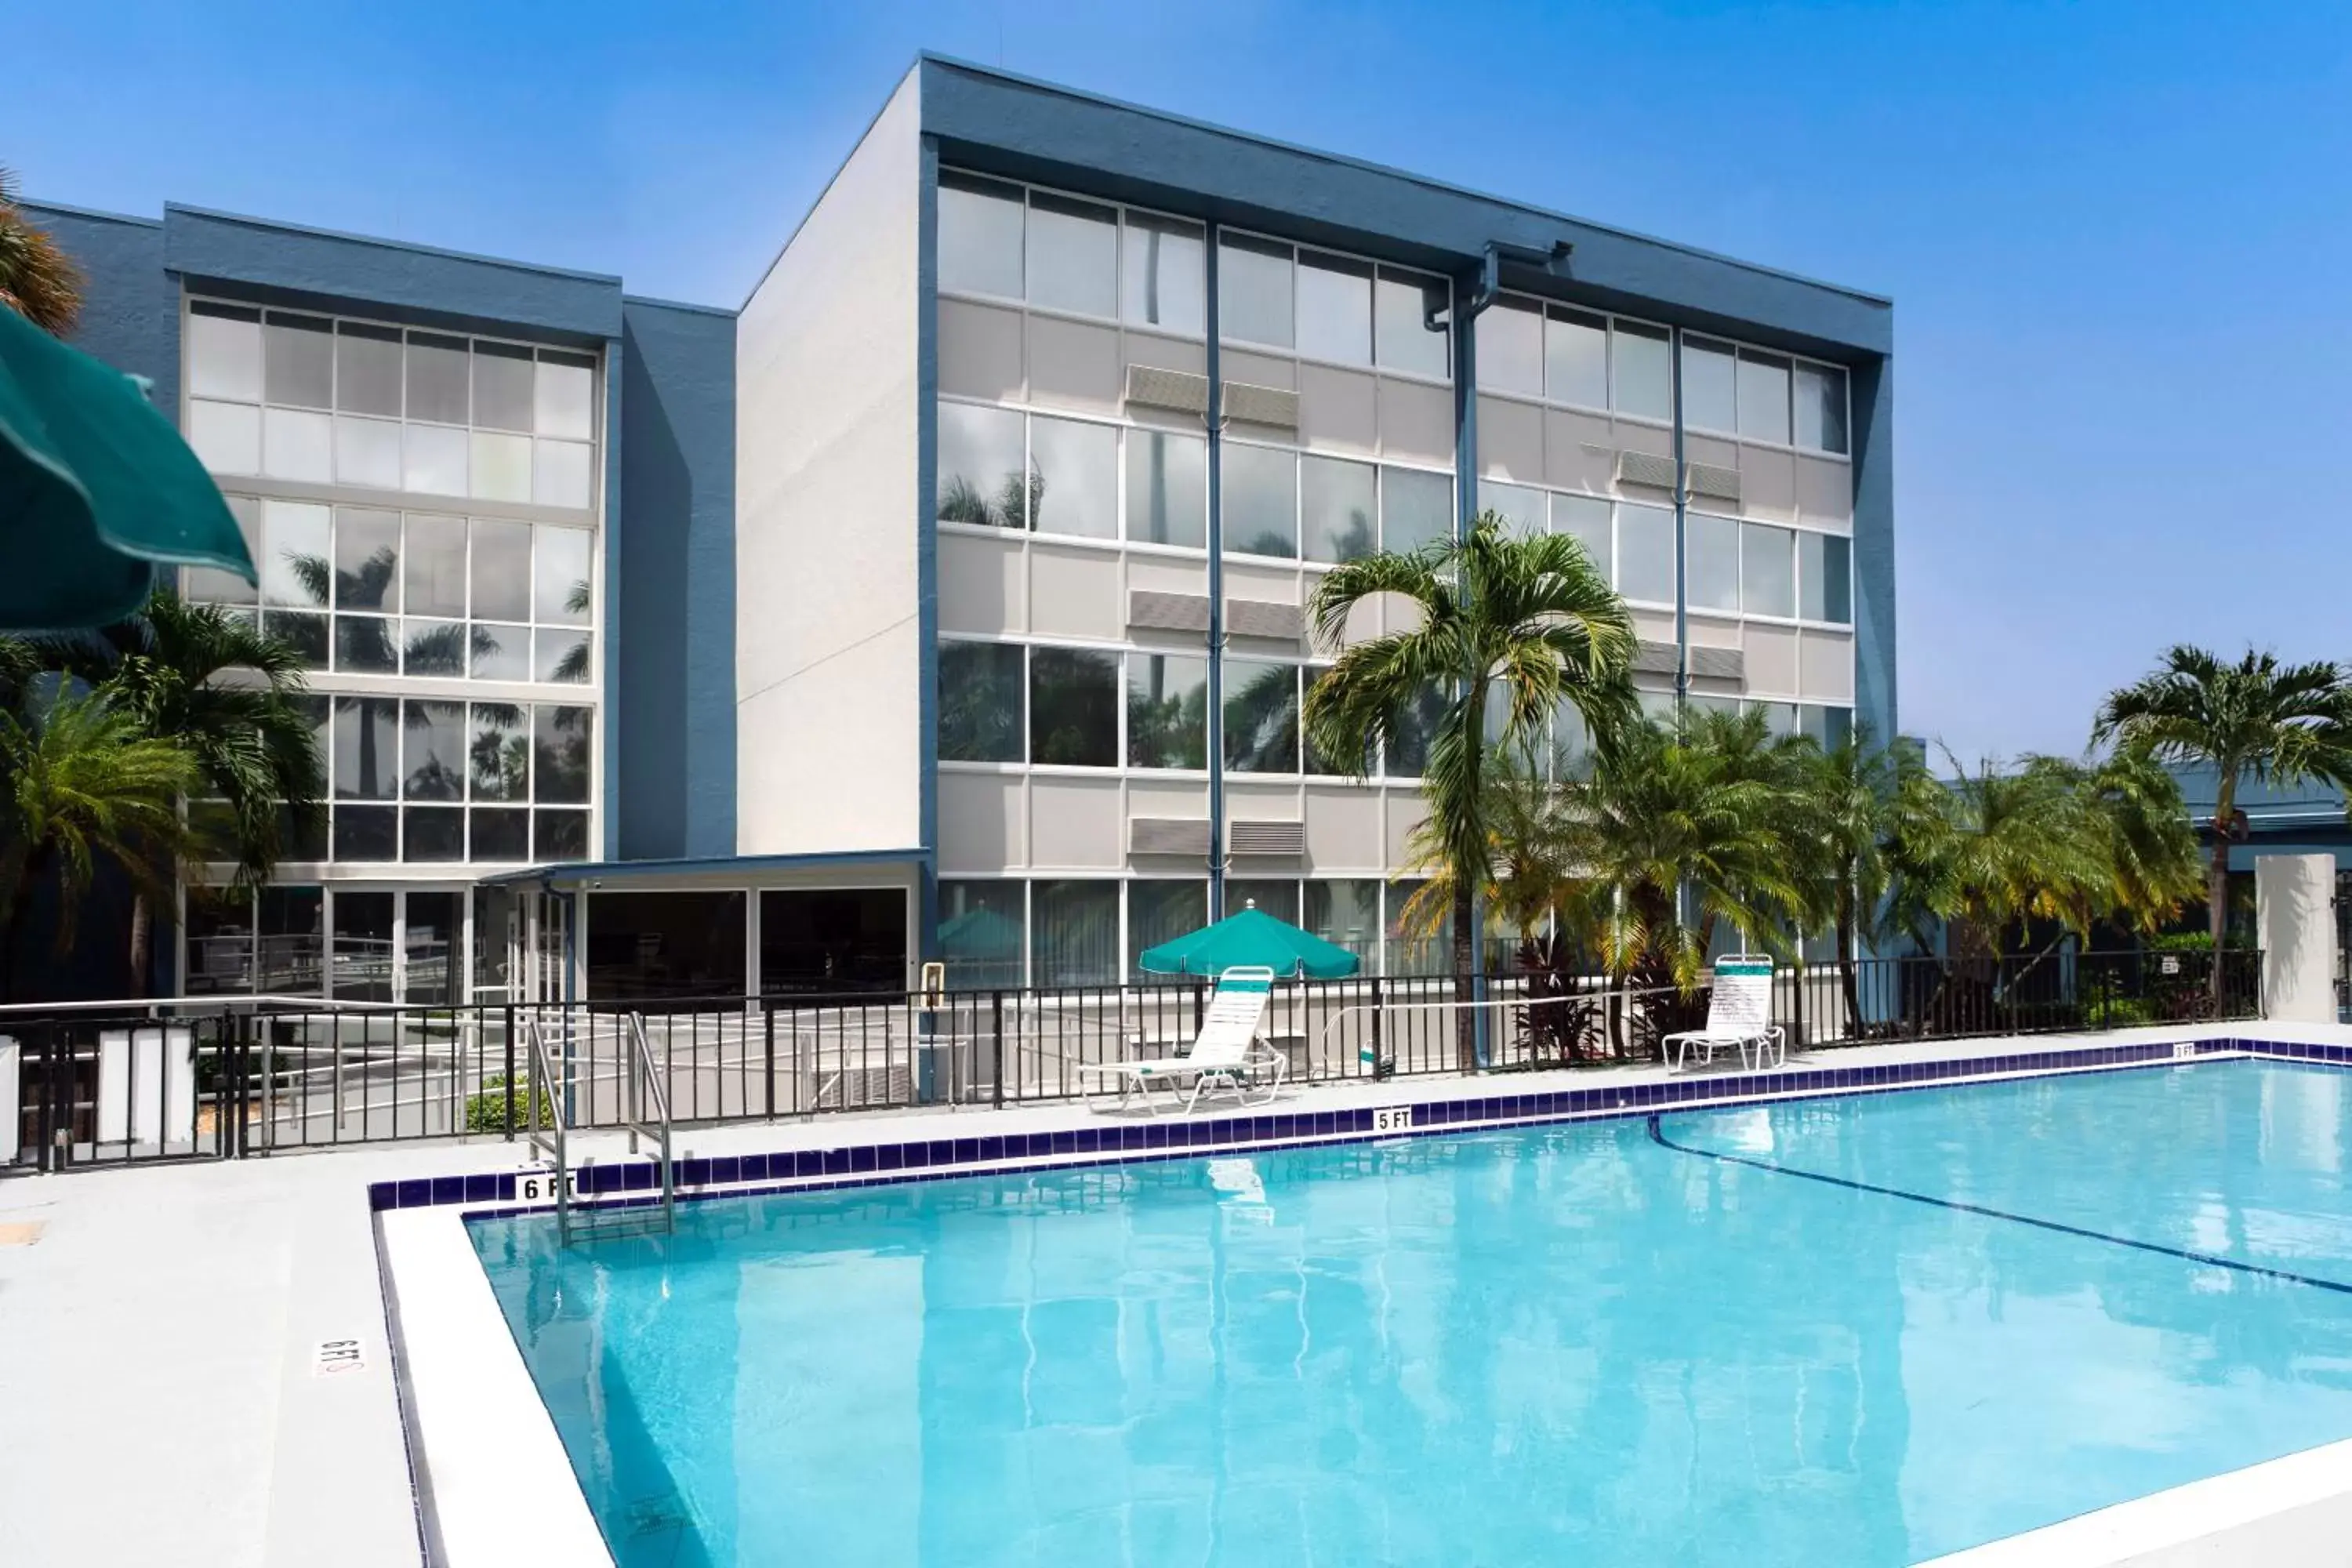 Swimming pool, Property Building in Days Inn by Wyndham Miami International Airport